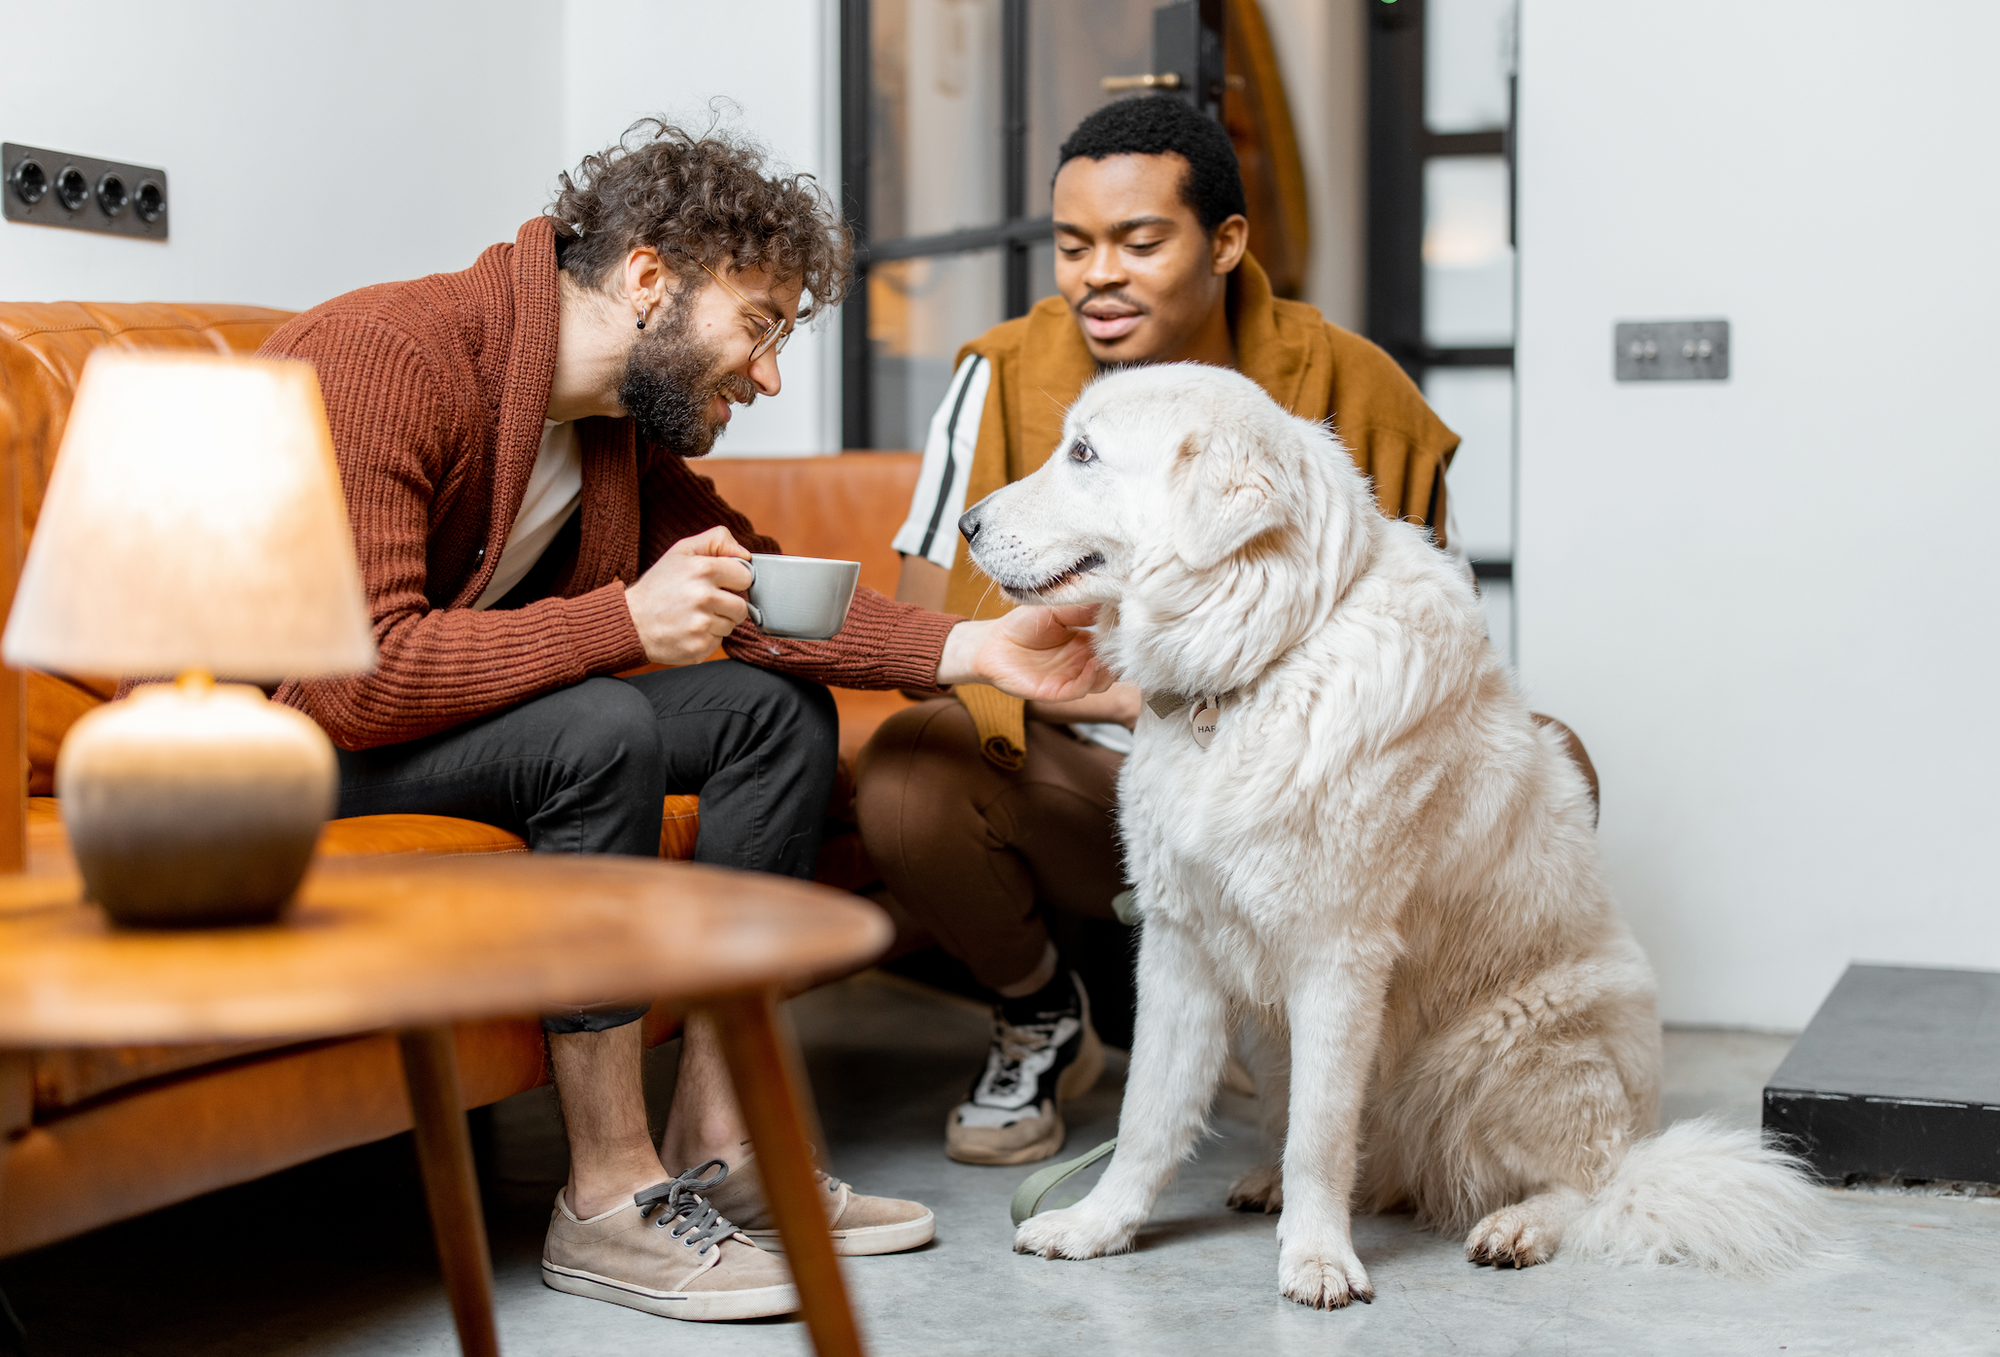 Men sitting on couch with dog, man holding coffee cup, dog on floor, lamp, person's legs, furry object.